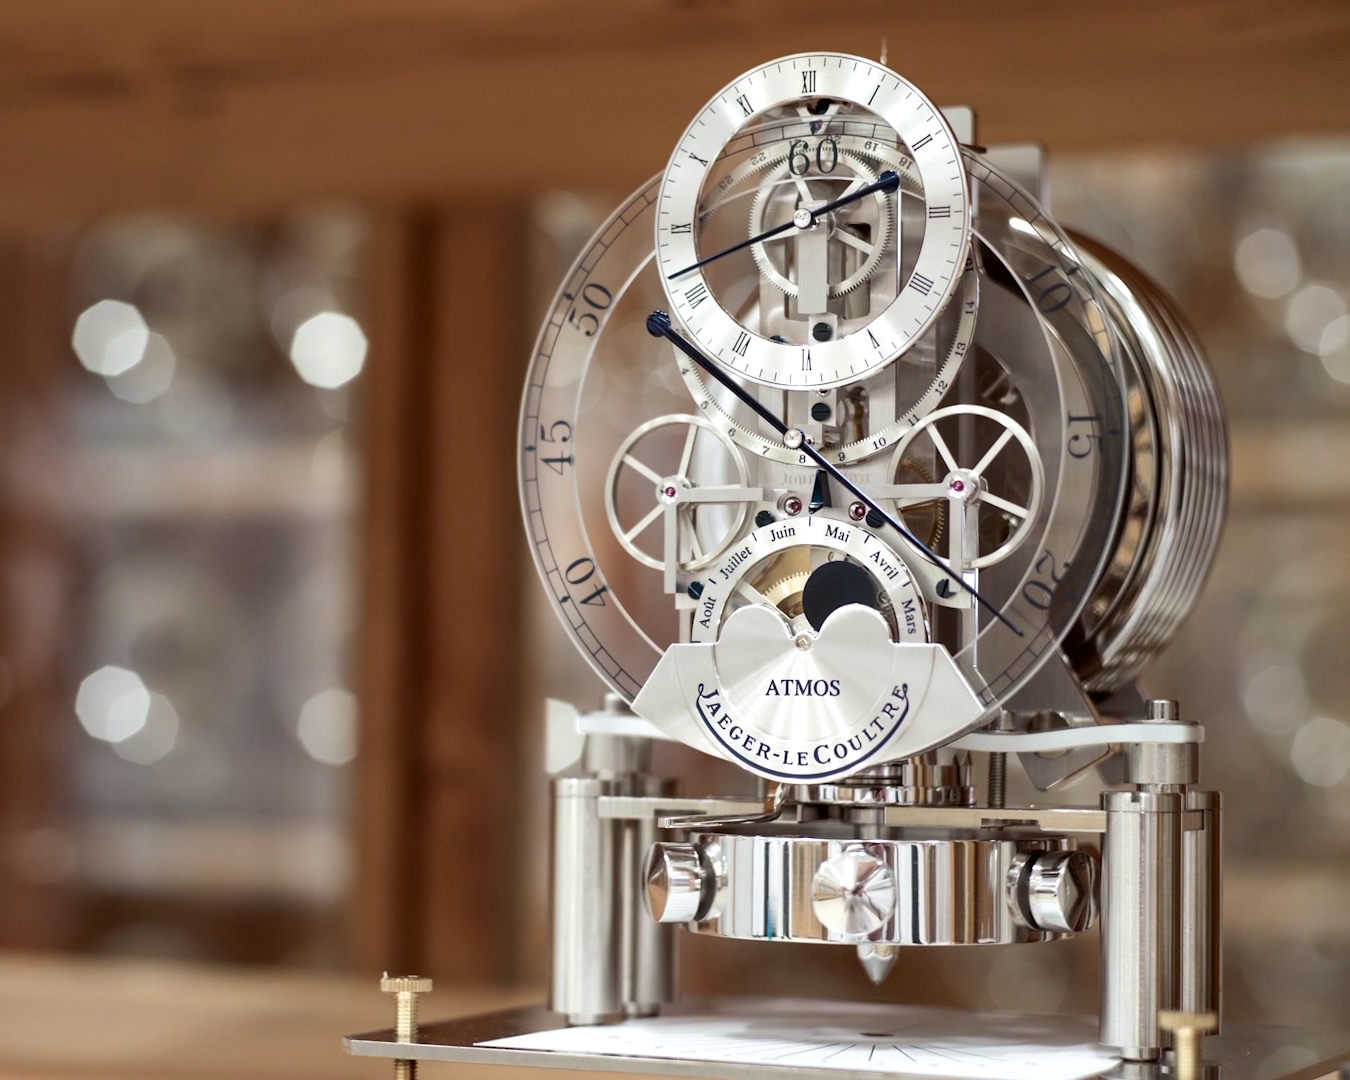 Atmos: the quest for perpetual motion